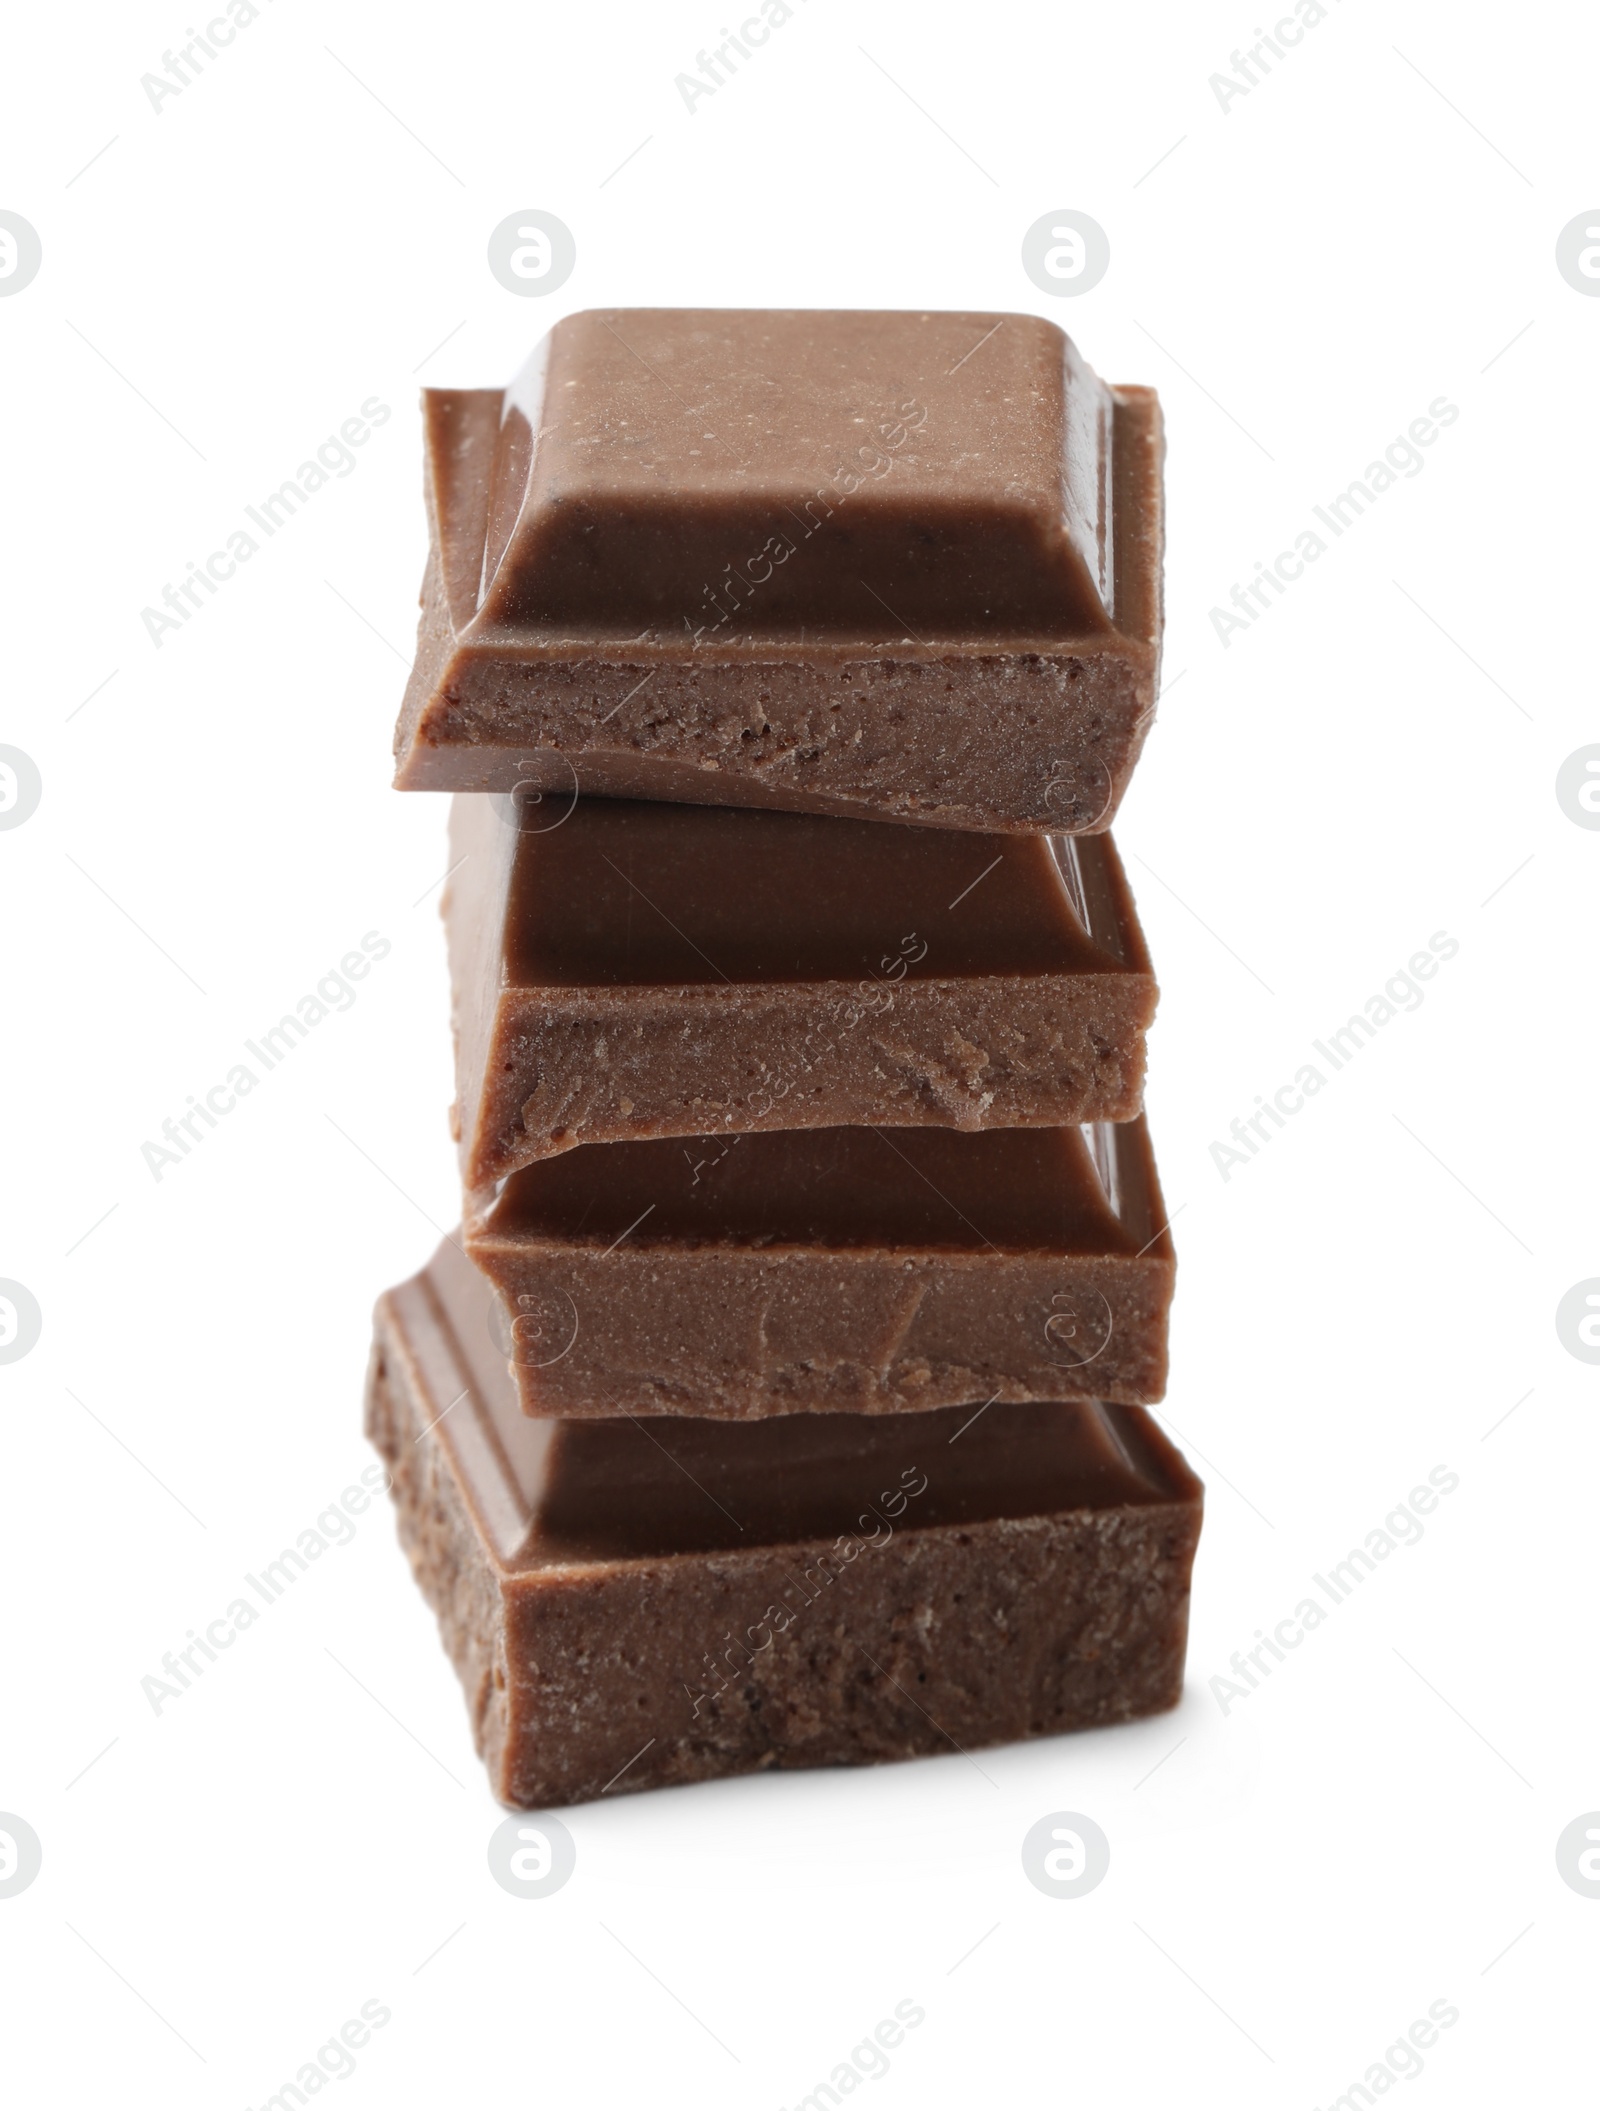 Photo of Pieces of delicious milk chocolate isolated on white